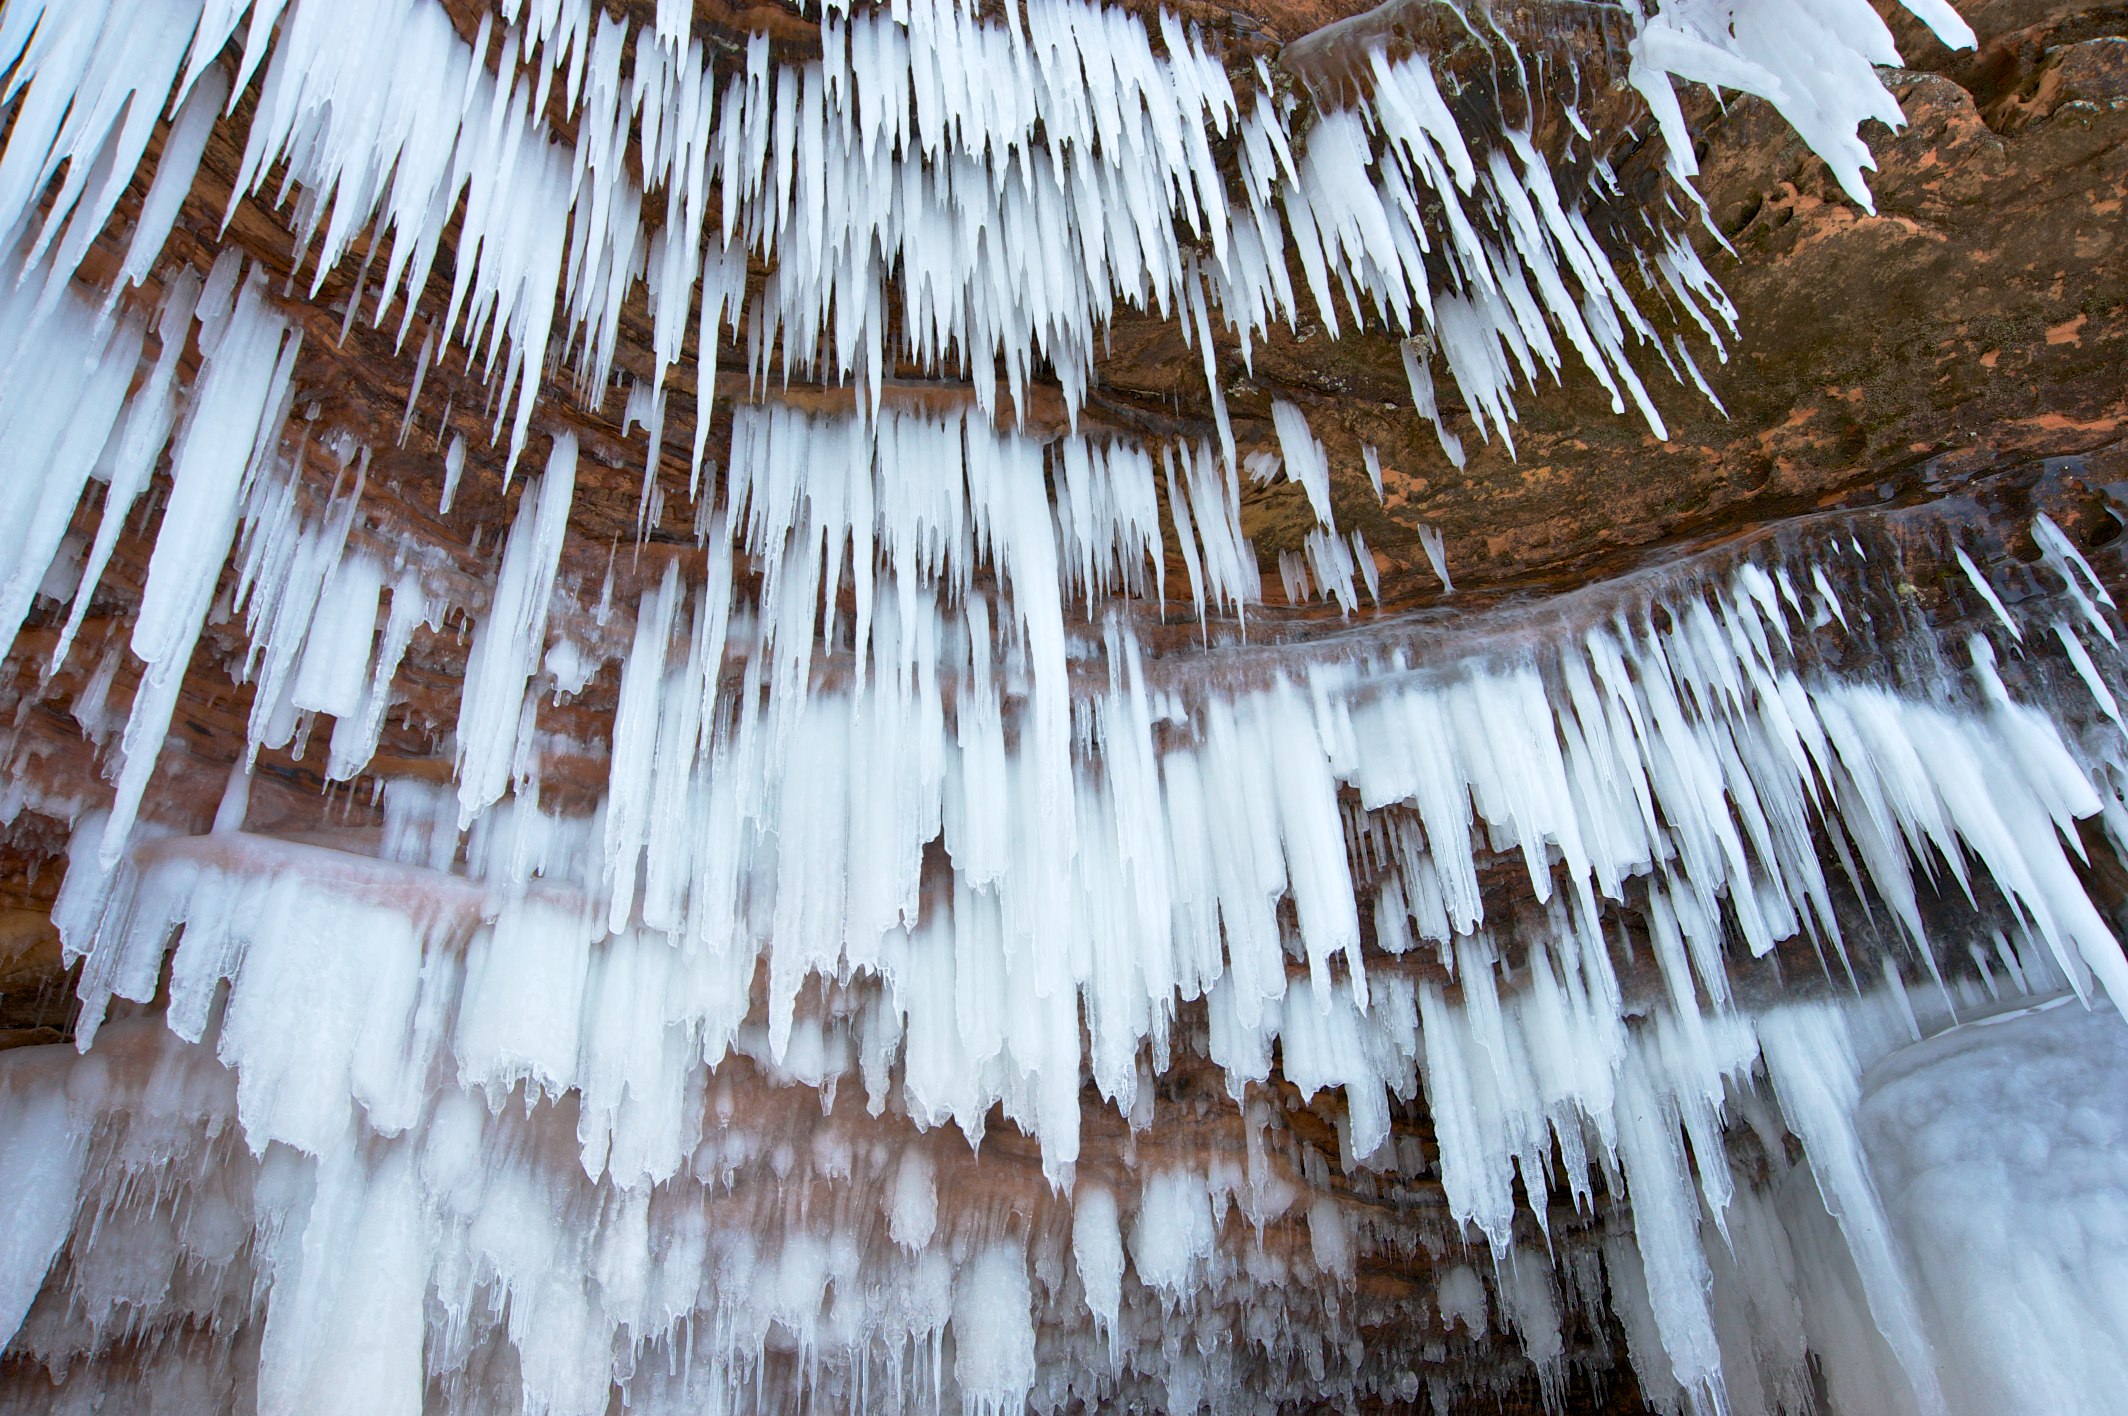 Ice caves in the Apostle Islands, early 2014